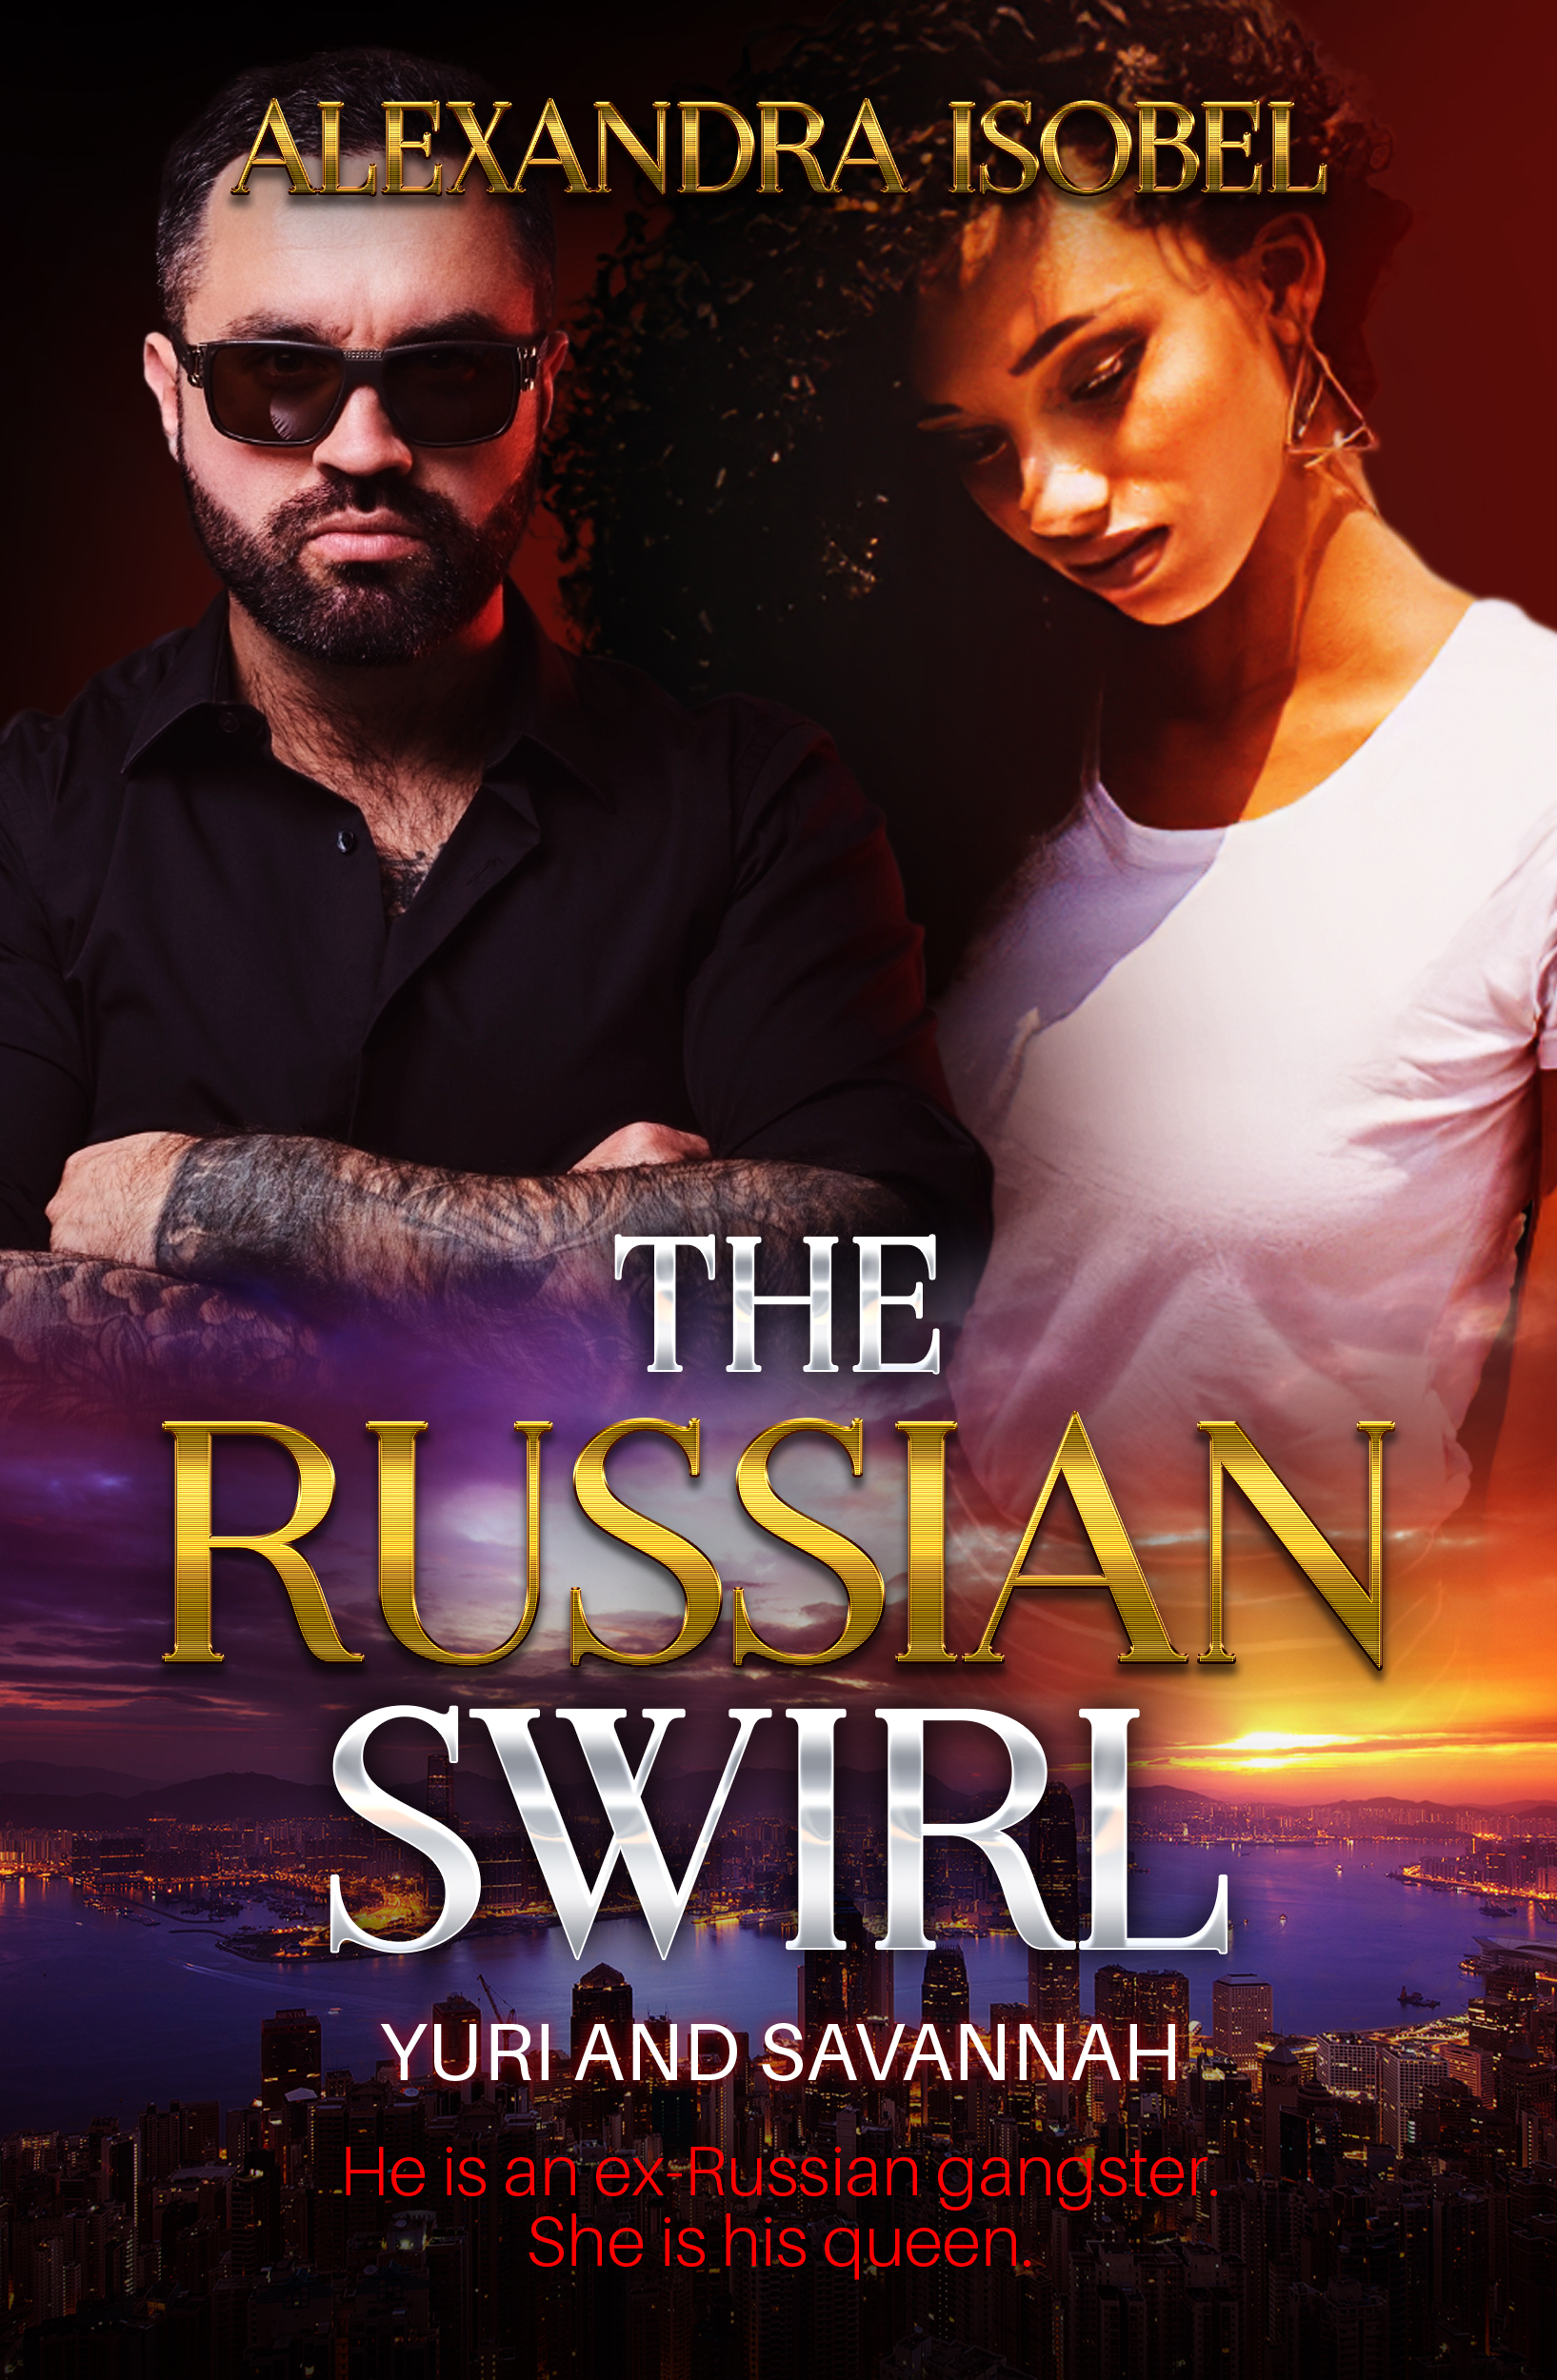 The Russian Swirl cover by Alexandra Isobel 30-July-2021